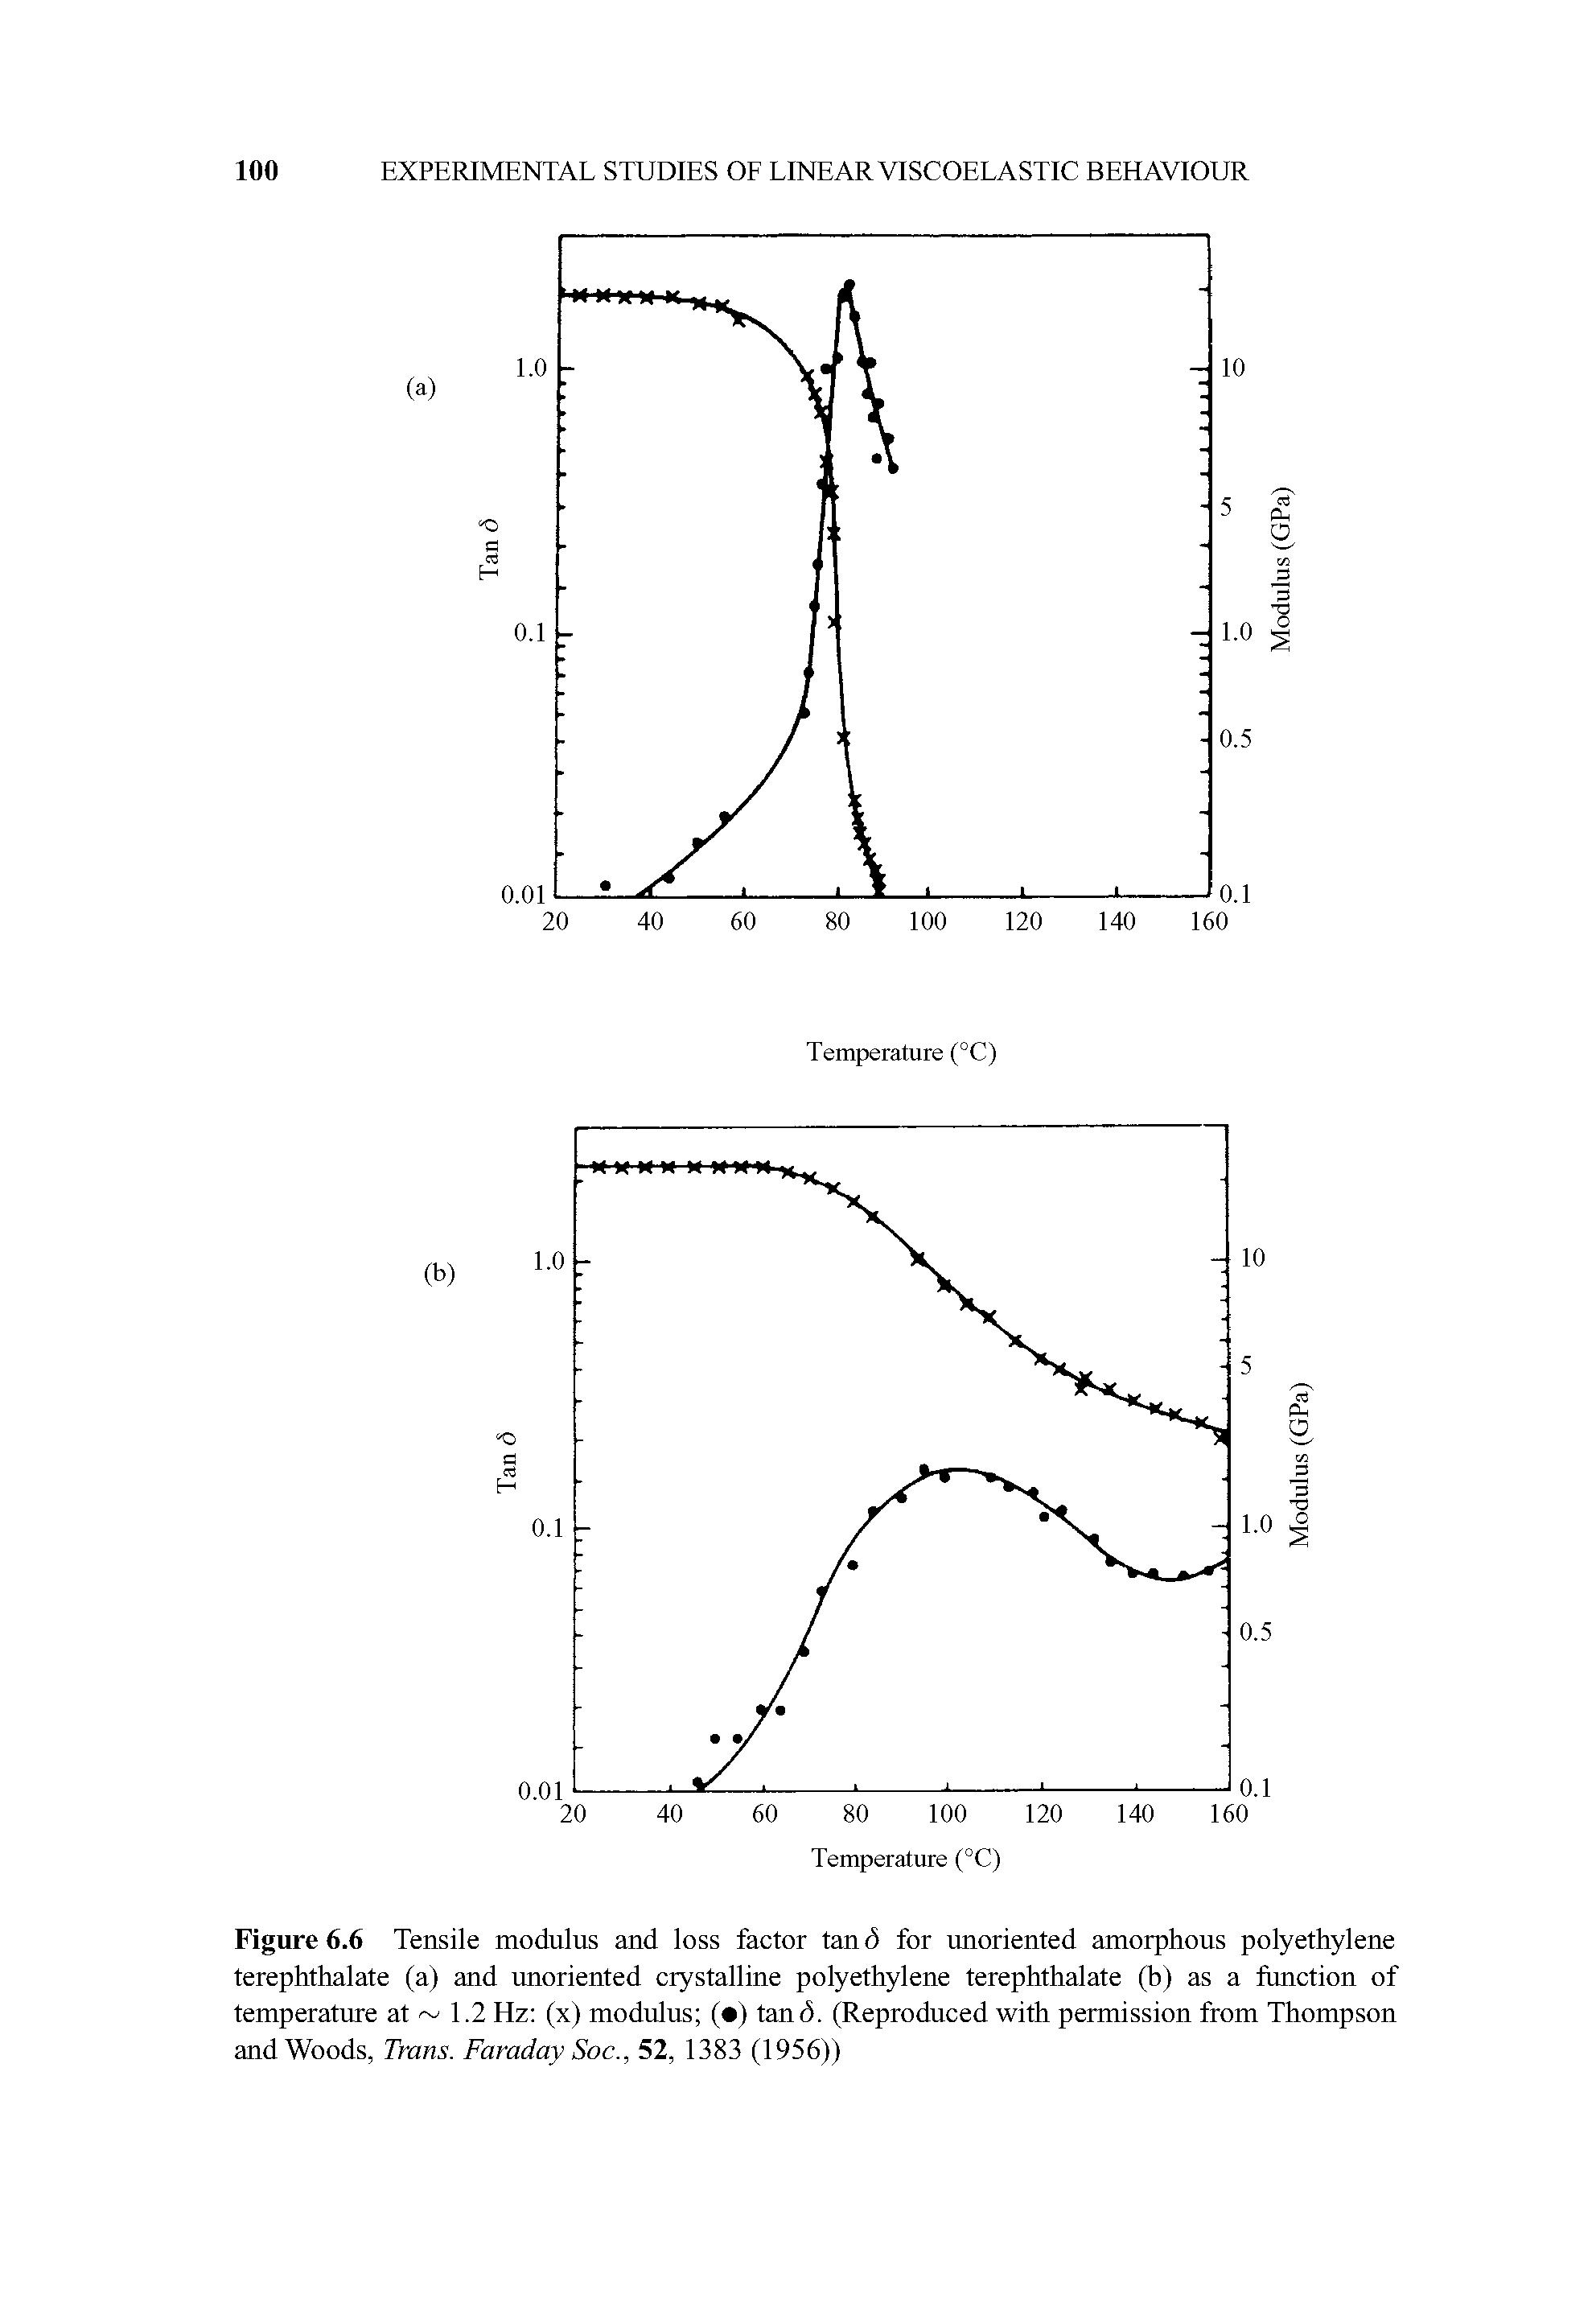 Figure 6.6 Tensile modulus and loss factor tand for unoriented amorphous polyethylene terephthalate (a) and unoriented crystalline polyethylene terephthalate (b) as a function of temperature at 1.2 Hz (x) modulus ( ) land. (Reproduced with permission from Thompson and Woods, Trans. Faraday Soc., 52, 1383 (1956))...